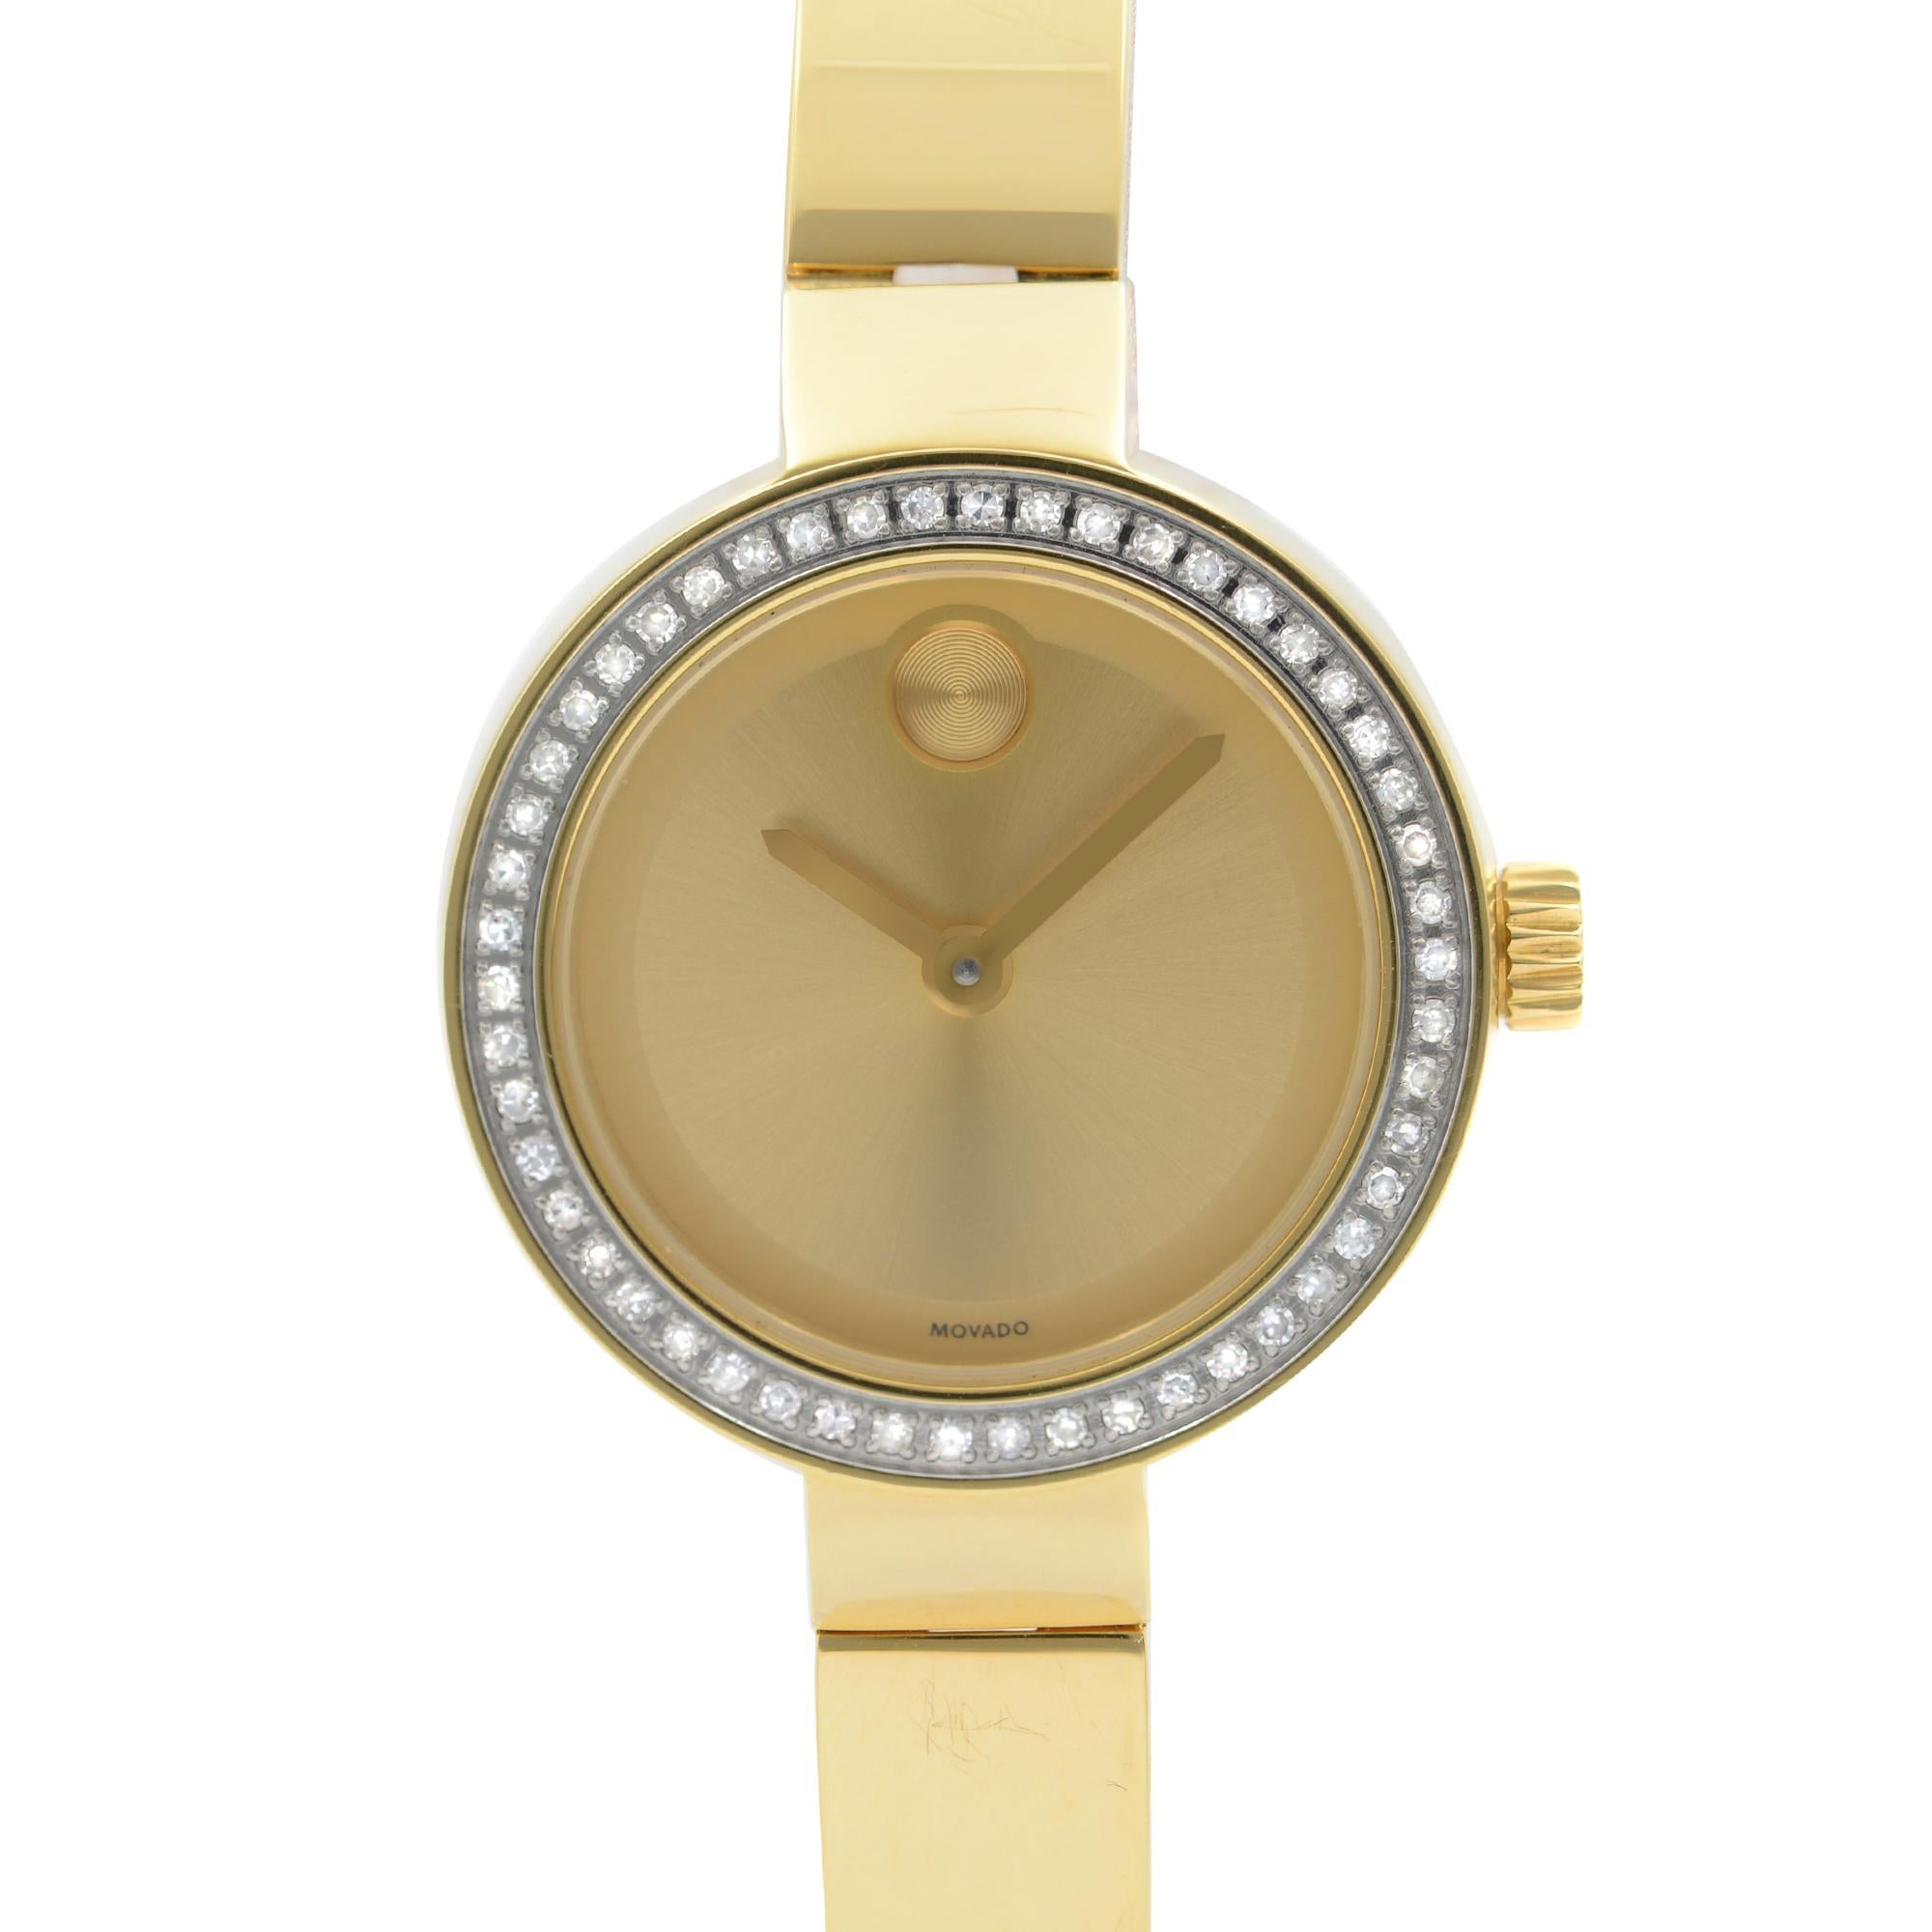 Preowned Movado Bold Dot Gold Dial Yellow Gold-Tone Ladies Watch 3600322. This Beautiful Timepiece Features: Yellow Gold-Tone Stainless Steel Case and Bracelet. Fixed Yellow Gold-Tone Bezel Set with Diamonds. Gold-Tone Dial with Gold-Tone Hands. No